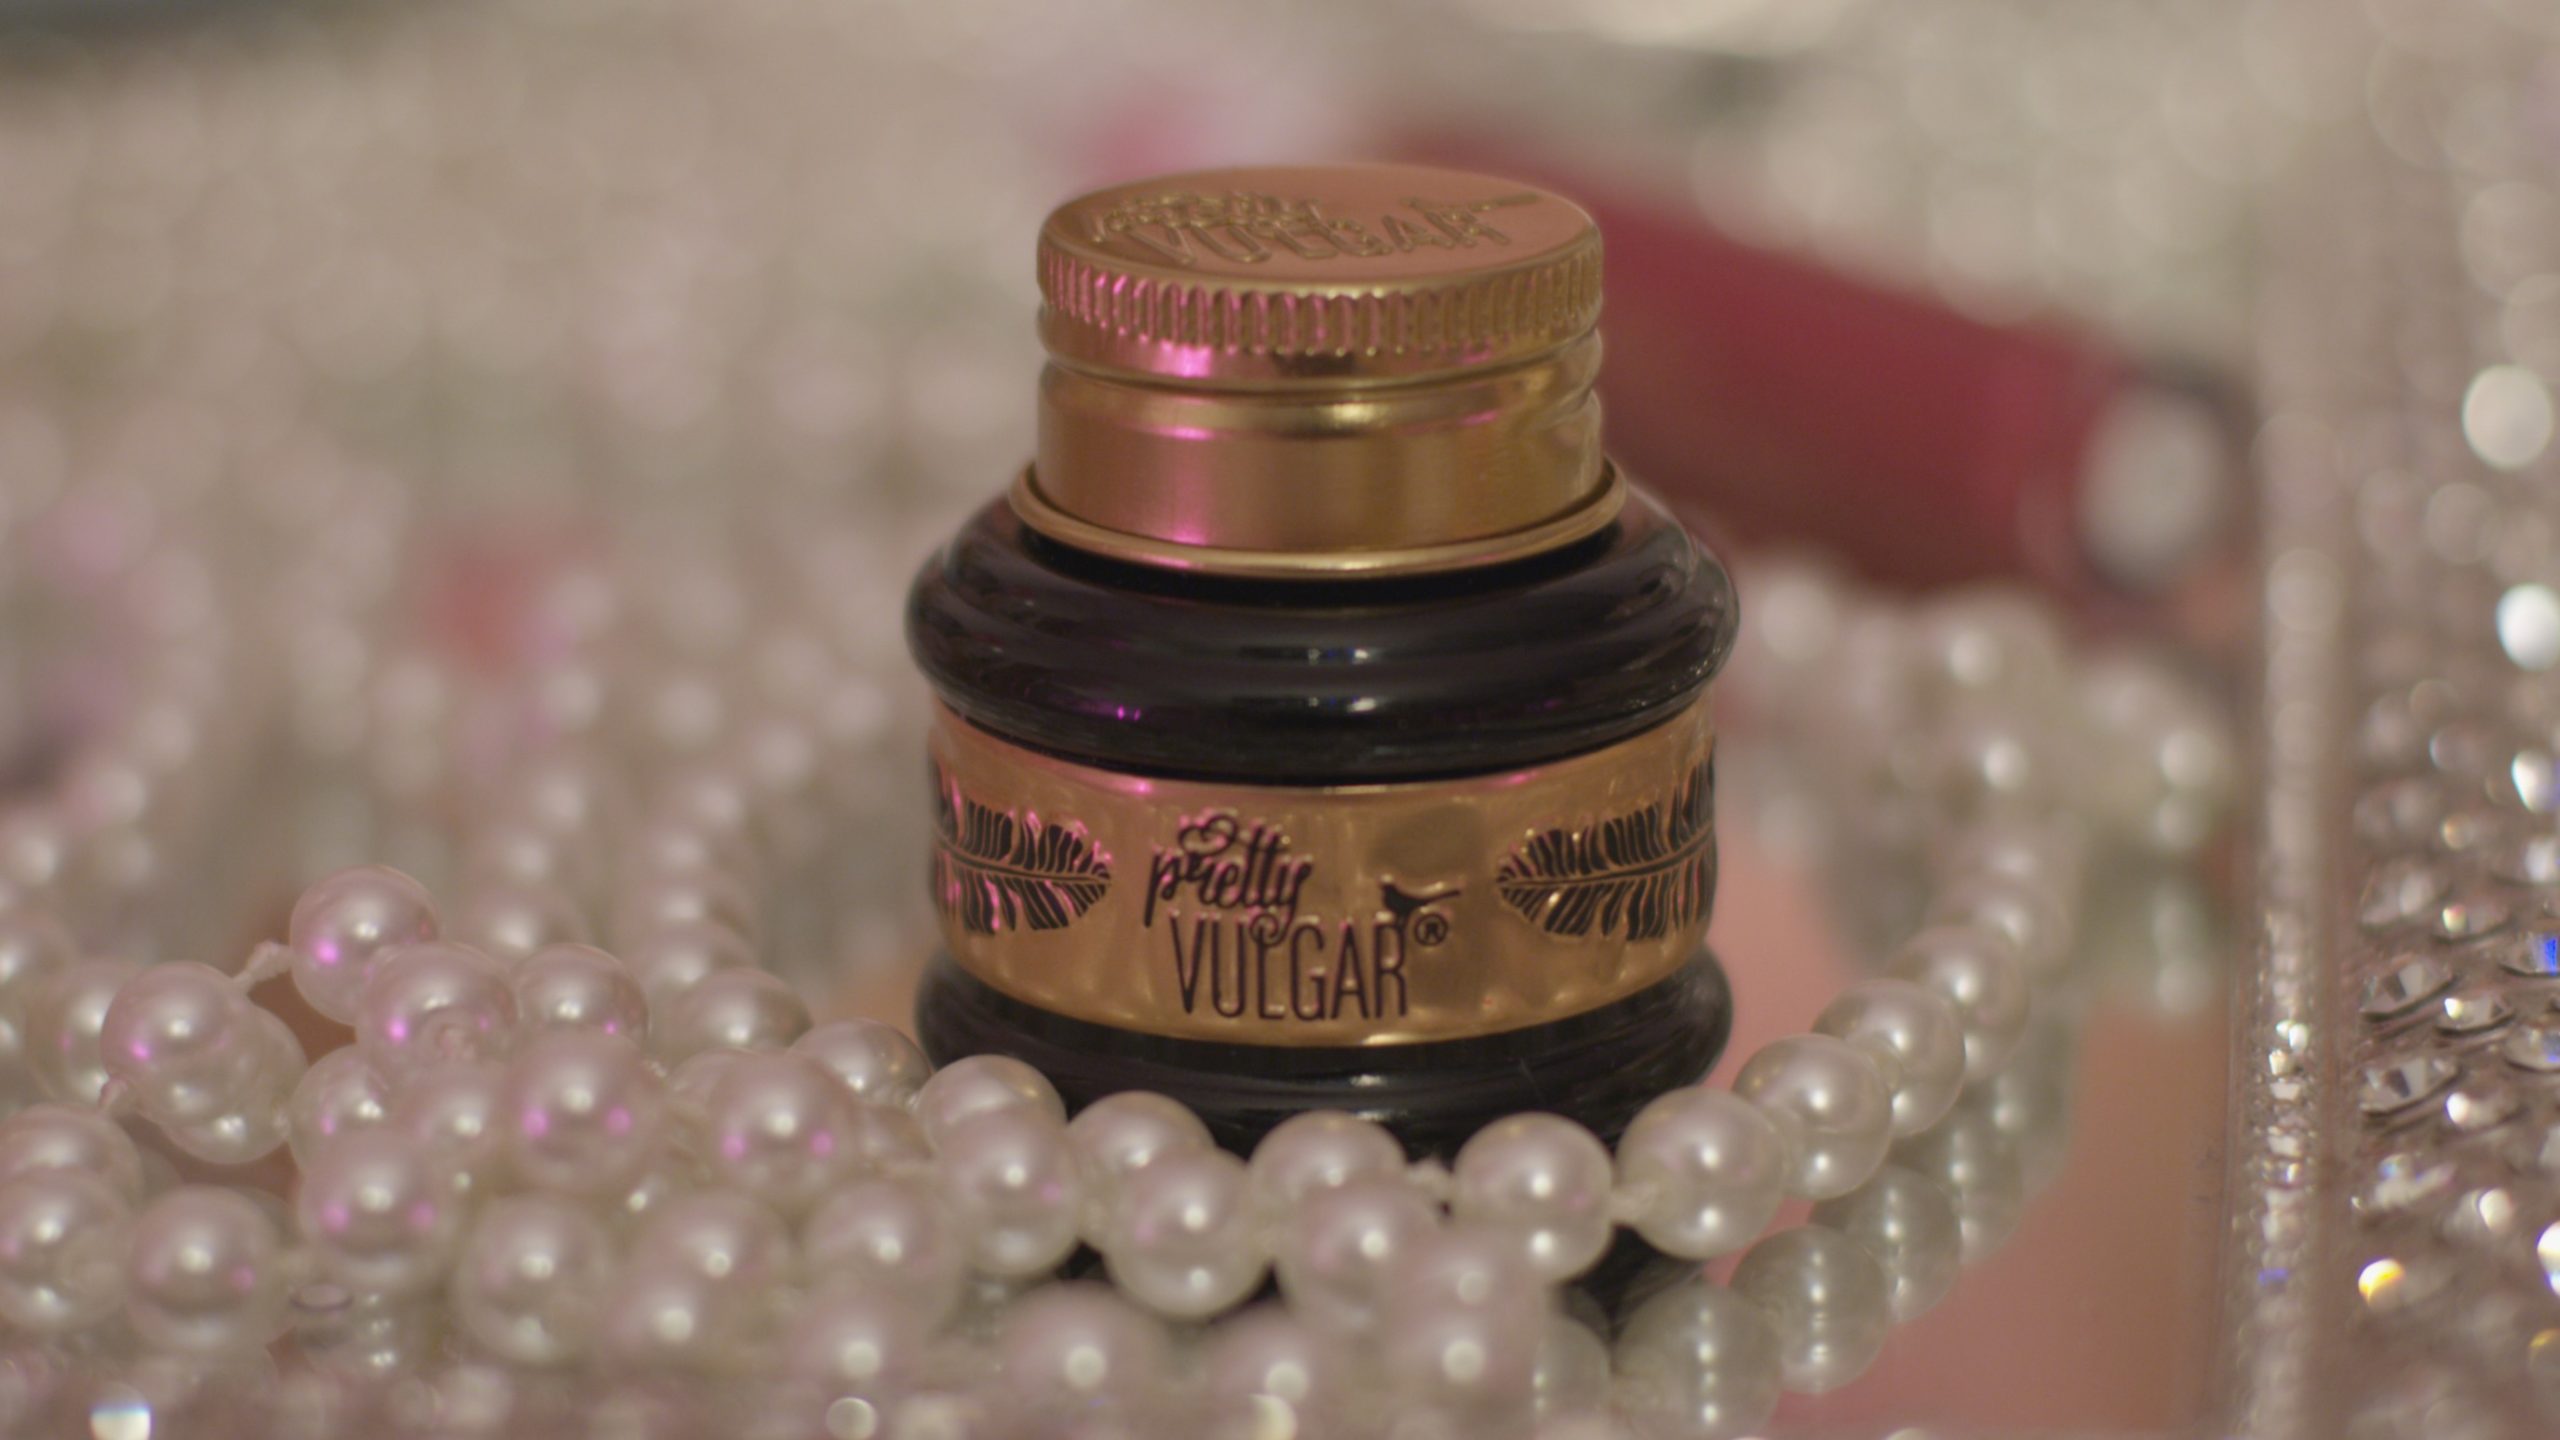 Close up of Pretty Vulgar makeup jug surrounded by pearls.